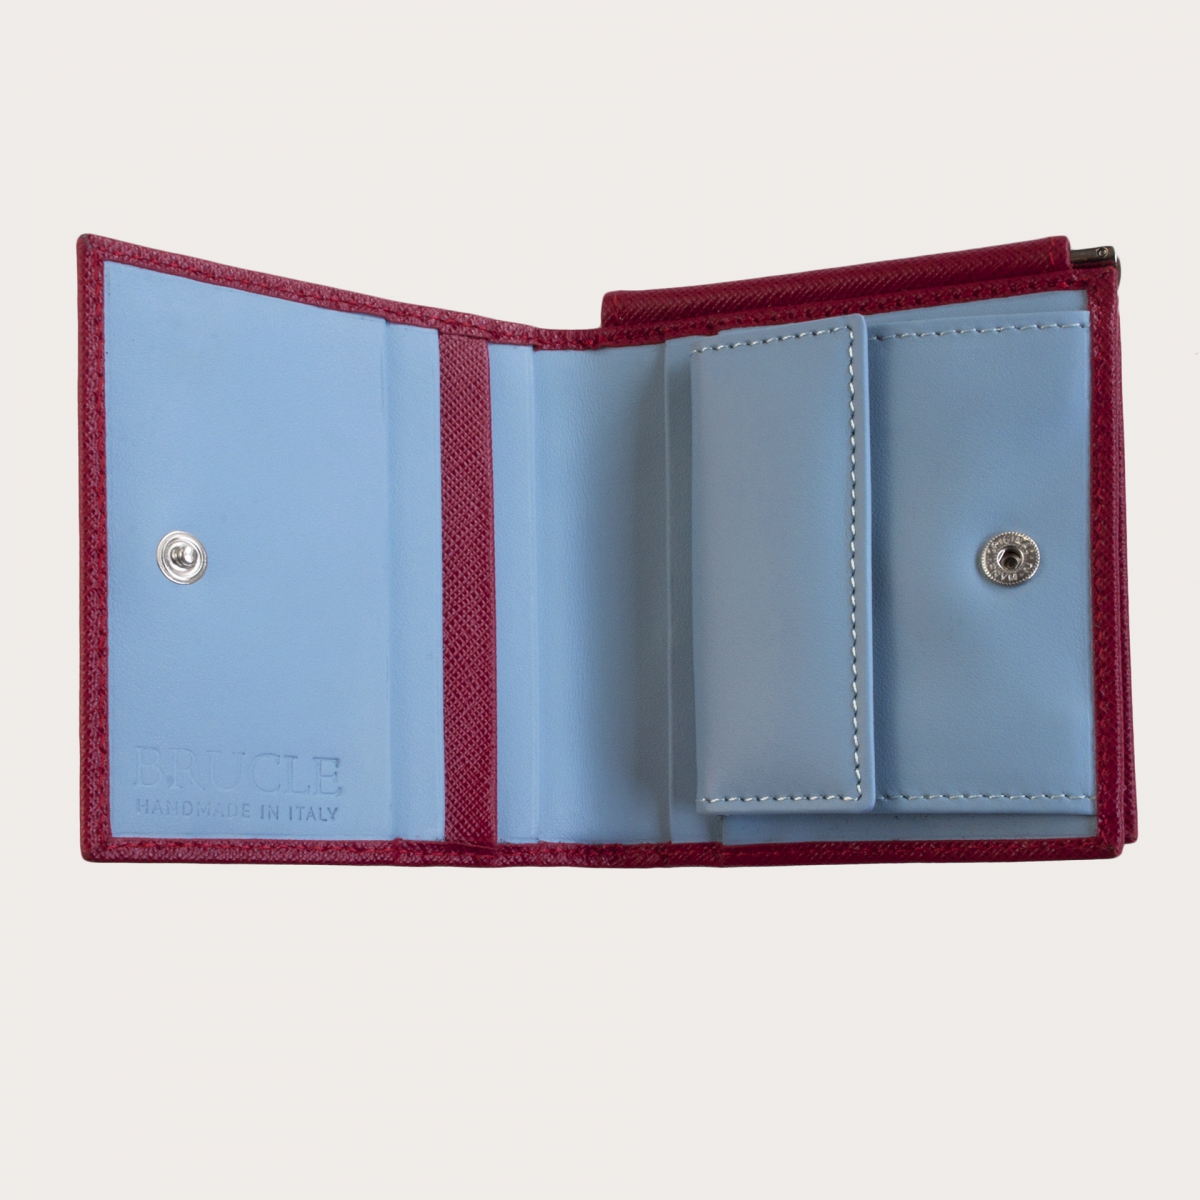 Compact mini wallet in saffiano leather with money clip and coin purse, red and light blue